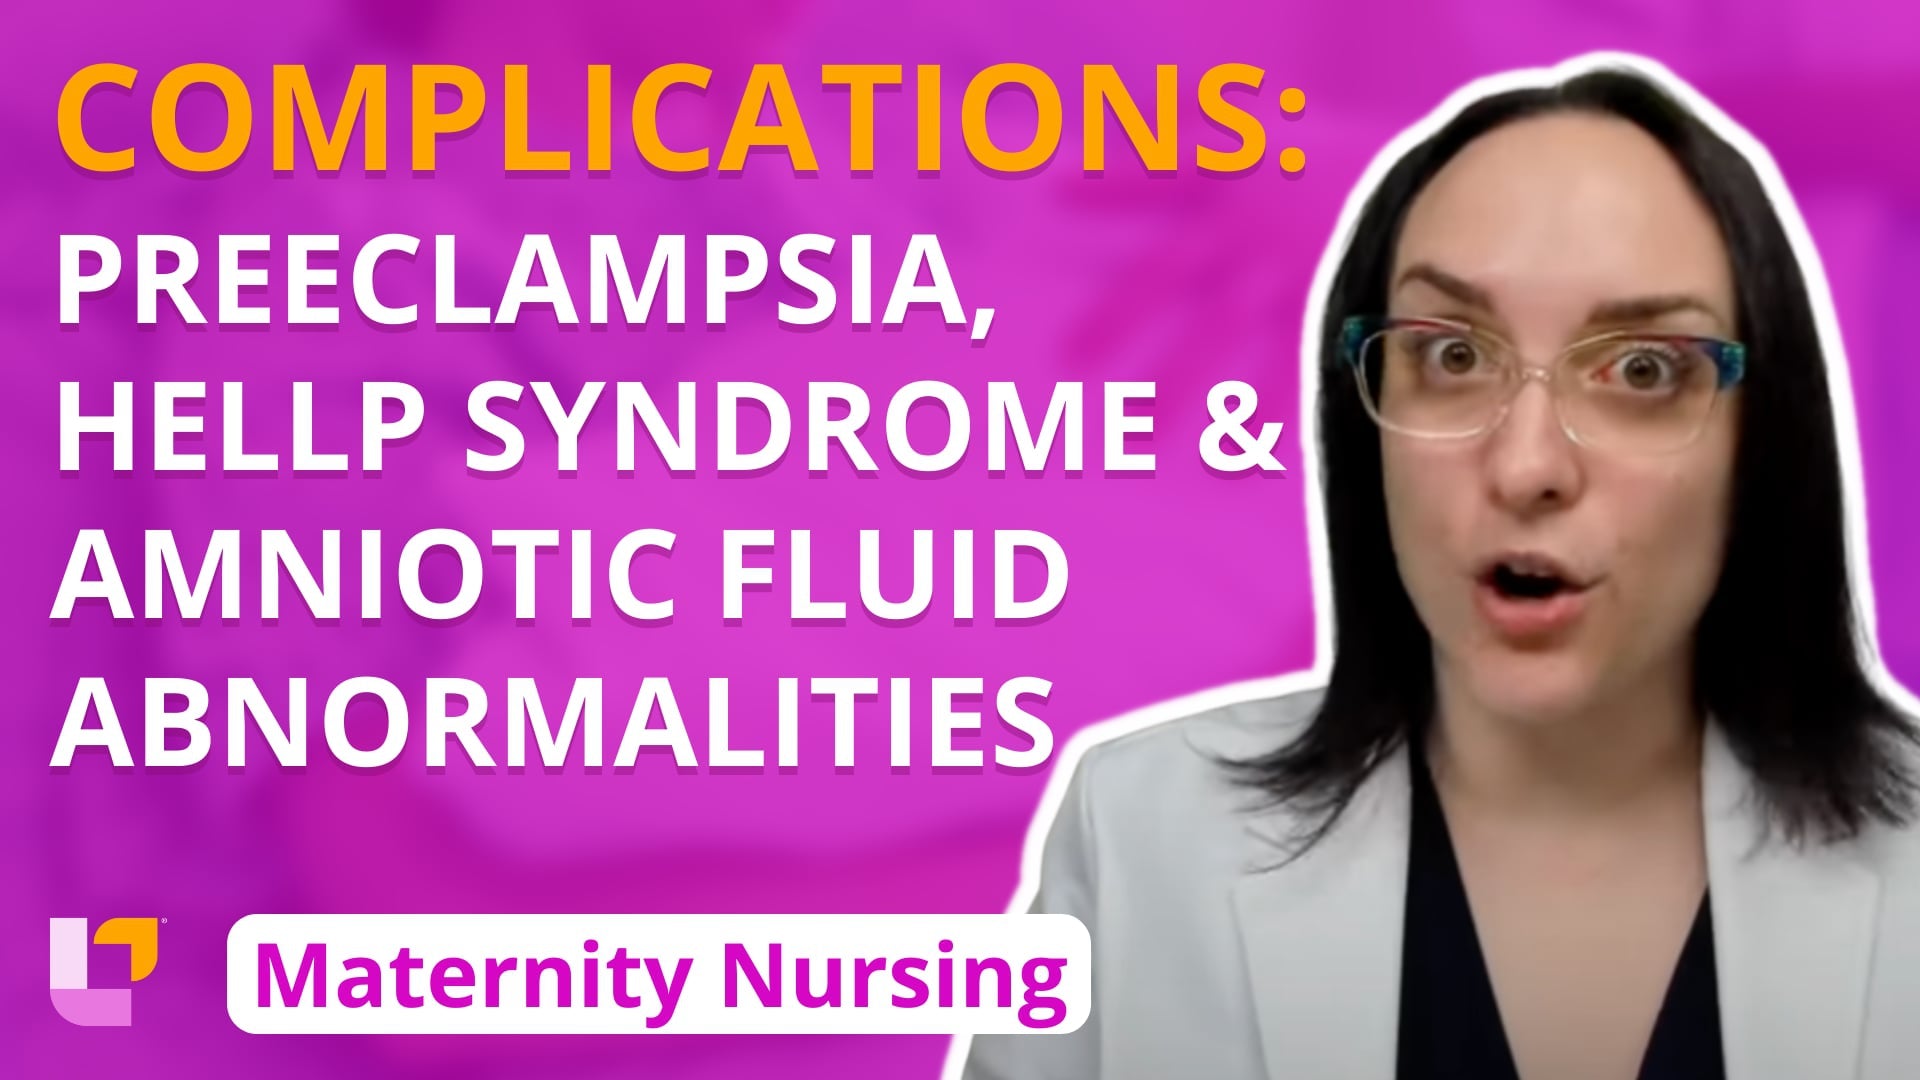 Maternity - Pregnancy, part 12: Complications: Preeclampsia, HELLP Syndrome, Amniotic Fluid Abnormalities - LevelUpRN